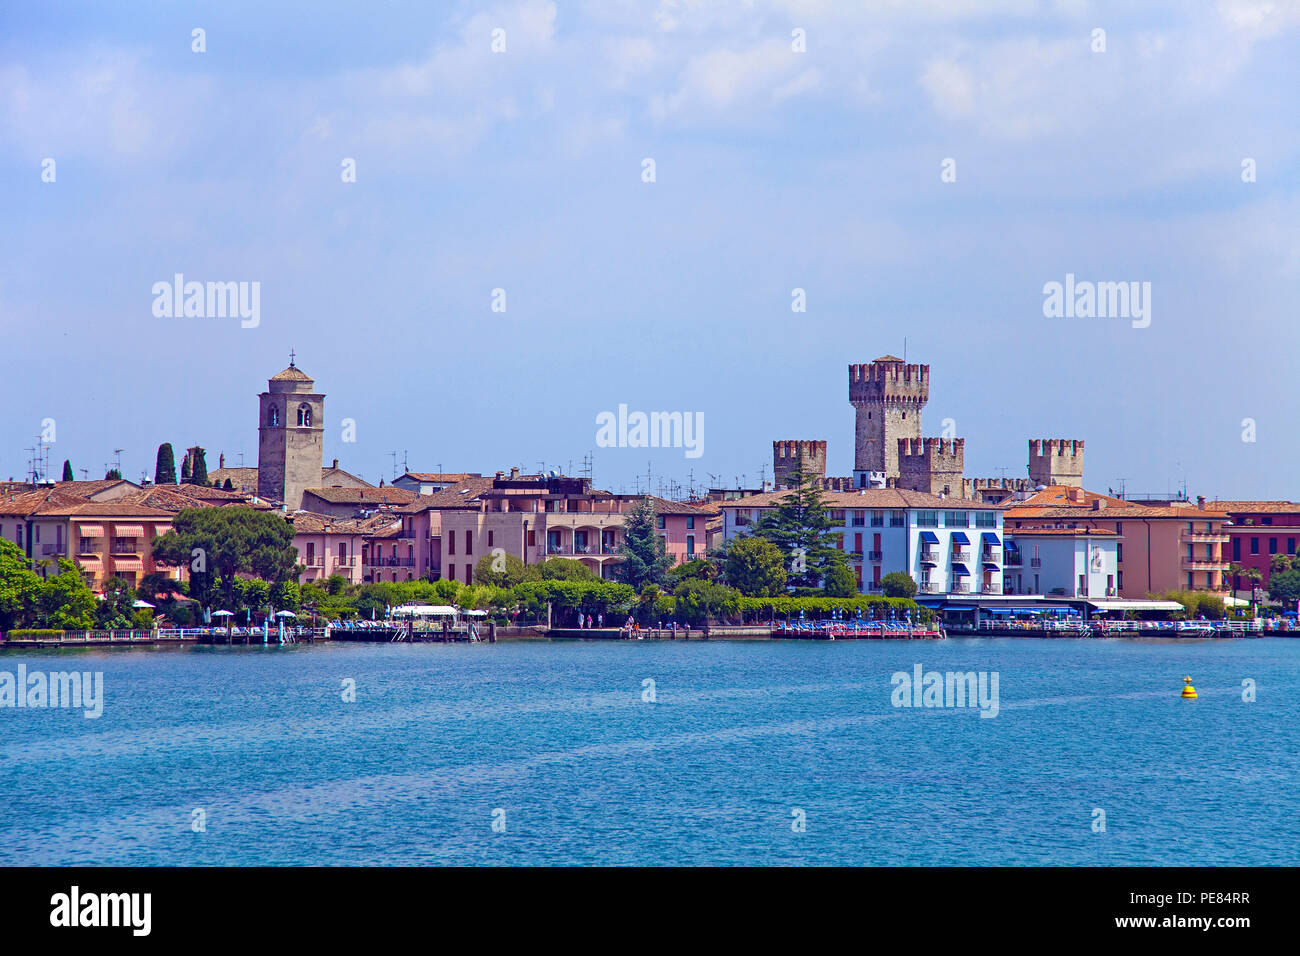 View from the lake on Sirmione with Scaliger castle, landmark of Sirmione, Lake Garda, Lombardy, Italy Stock Photo